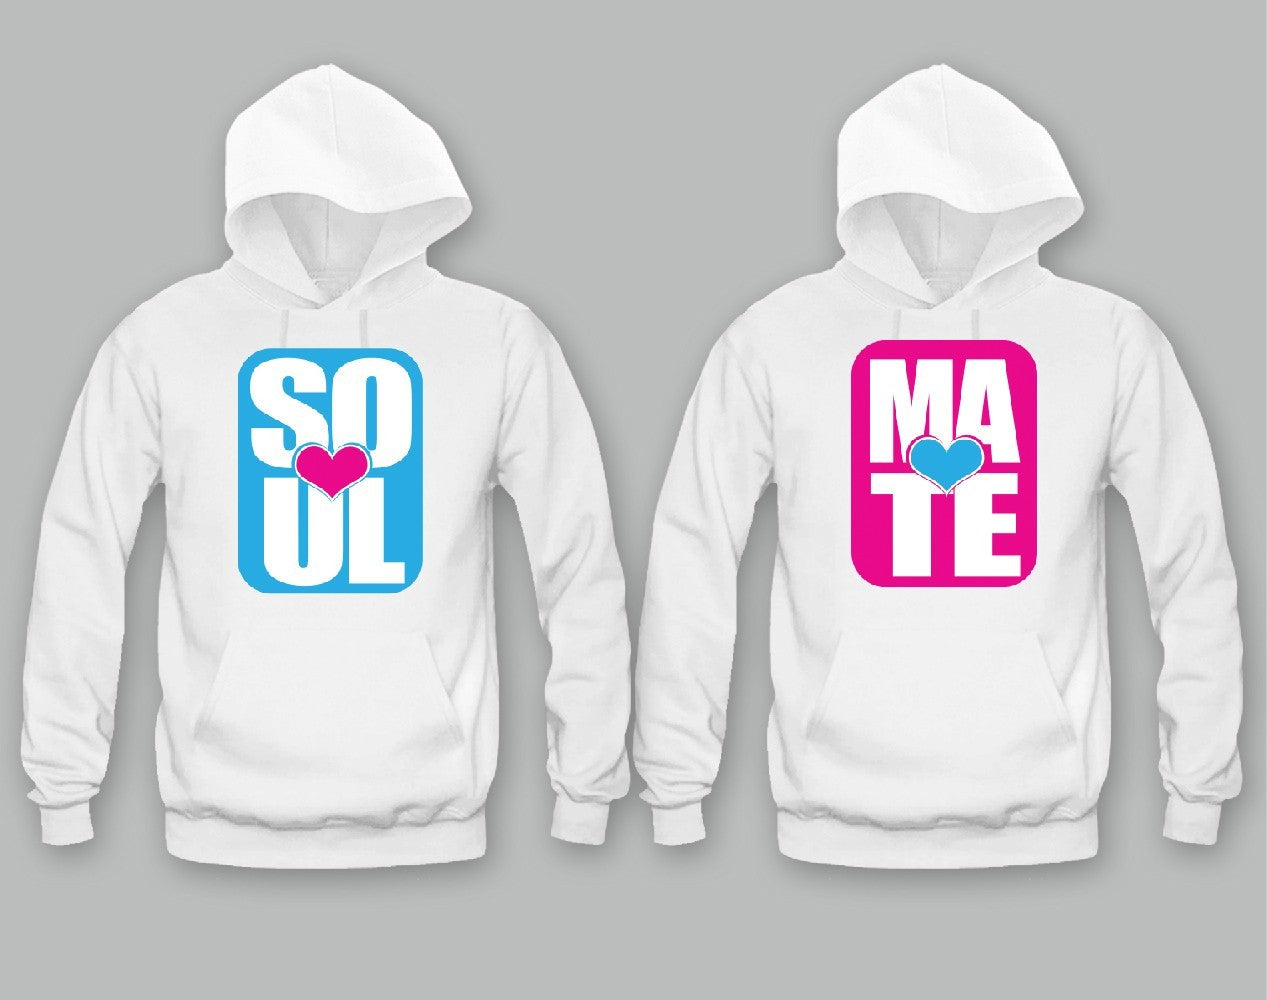 Soul Mate Bright Colors Unisex  Couple  Matching  Hoodies 